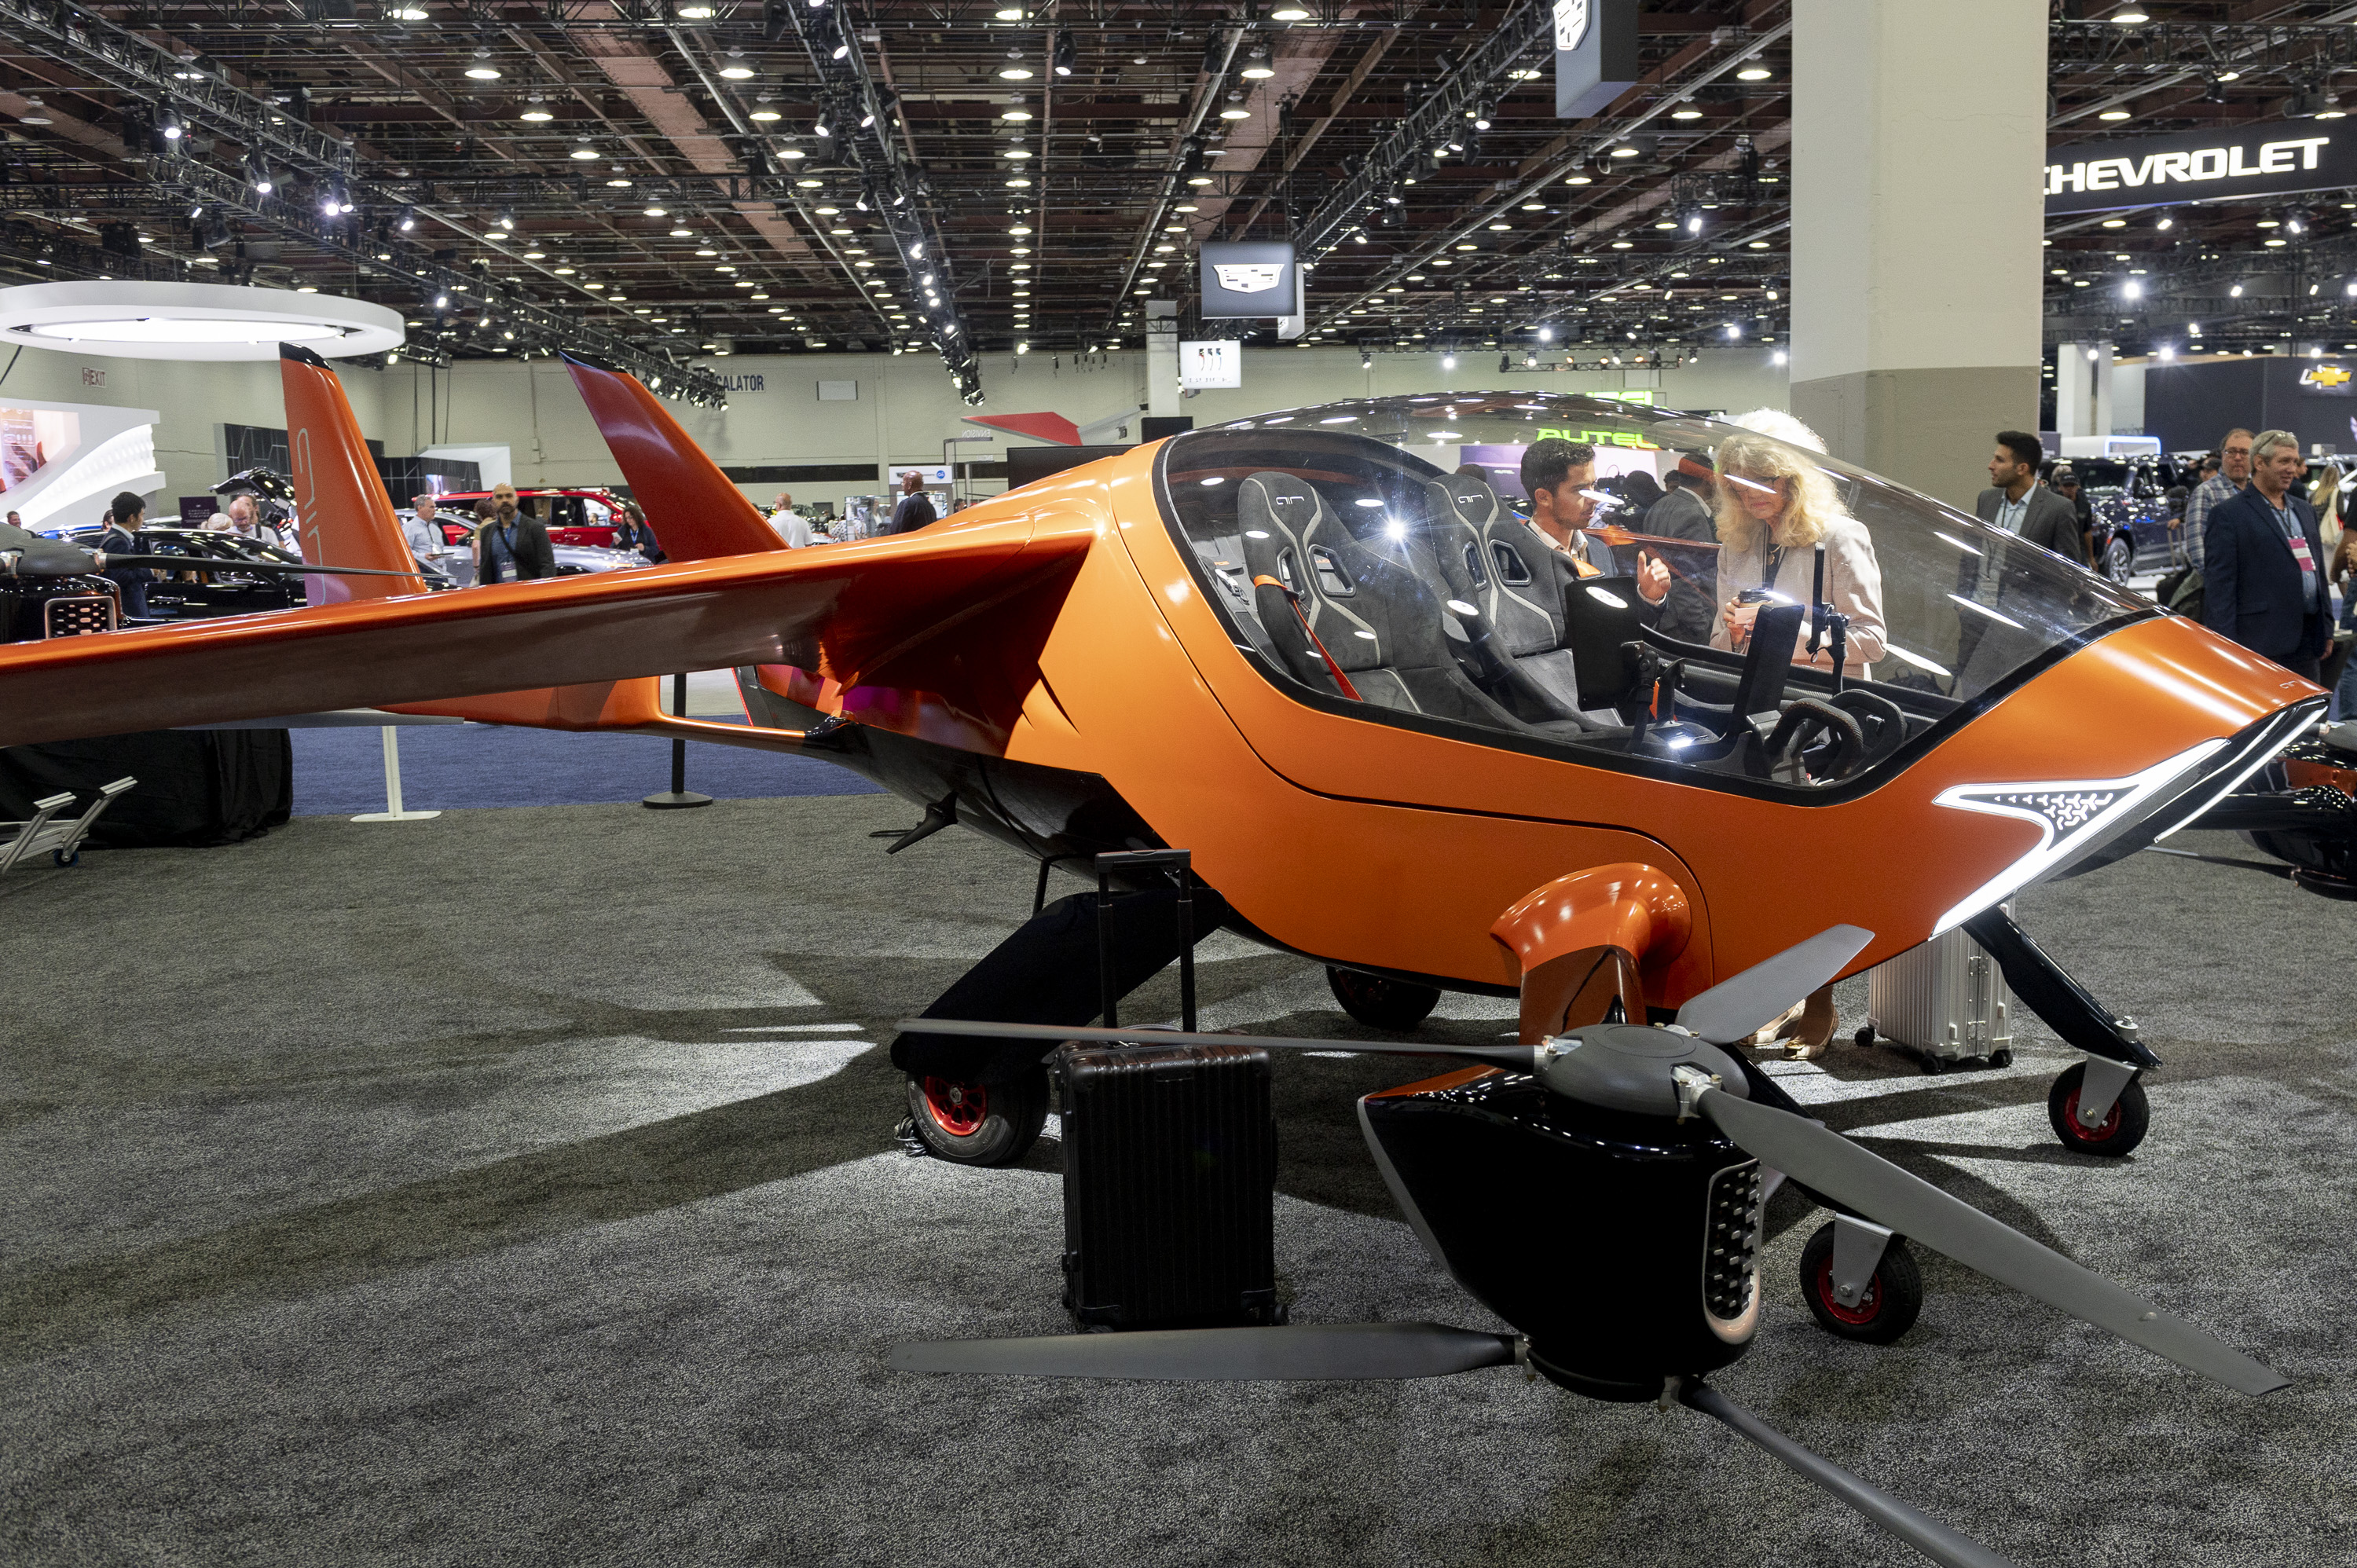 An AIR ONE VTOL aircraft on display as the 2022 North American International Auto Show begins with media preview day at Huntington Place in Detroit on Wednesday, Sept. 14 2022.